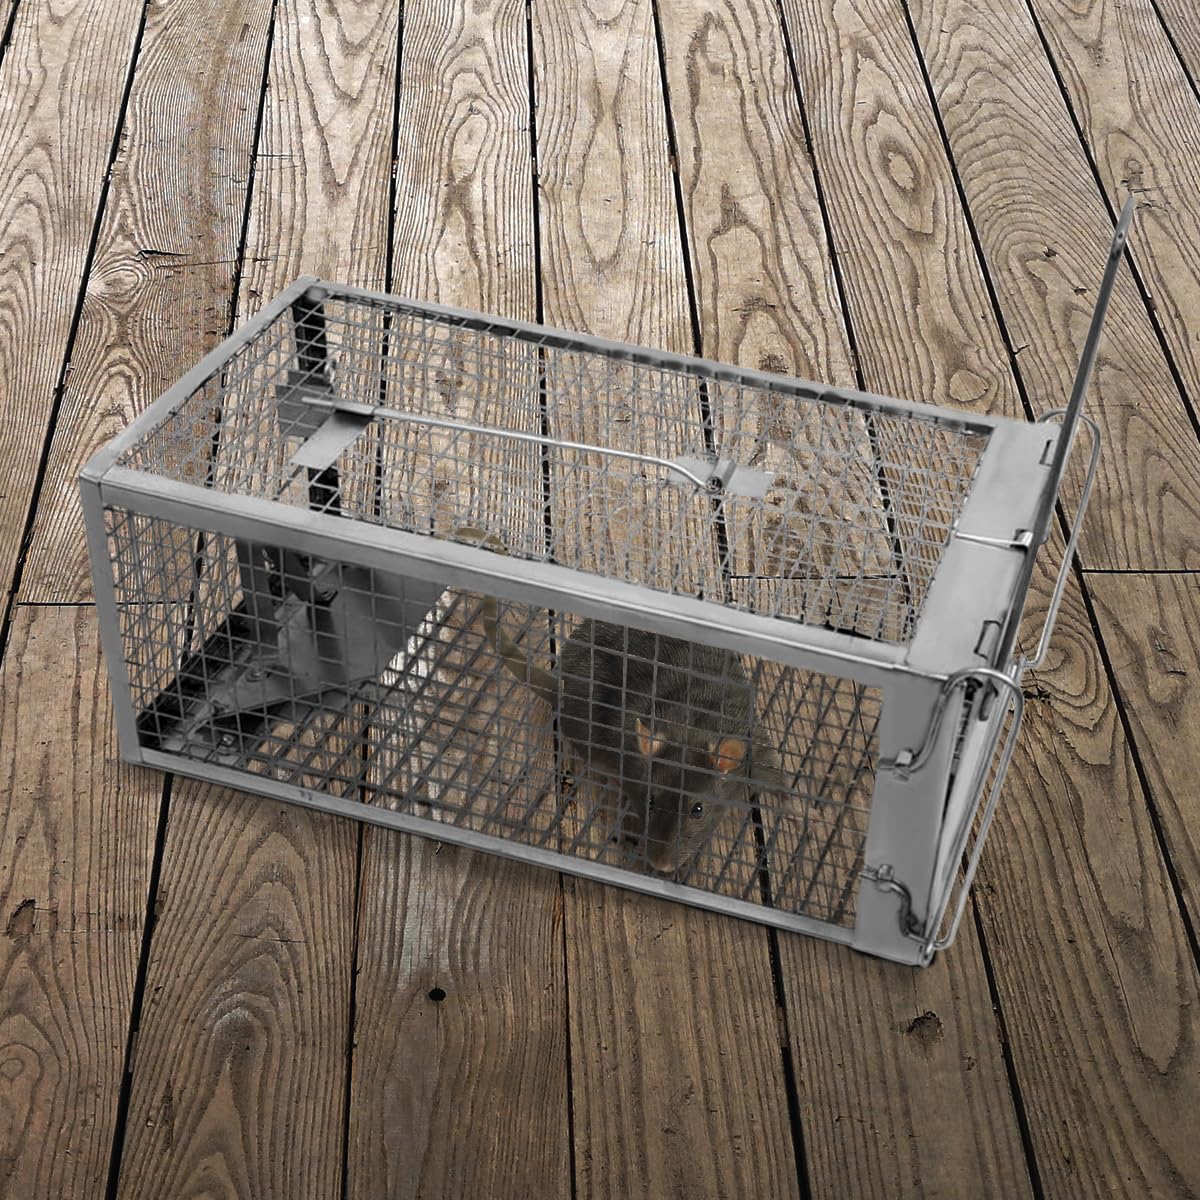 Chipmunk Trap -2 Pack, Squirell and Rat Trap Cages That Works, Humane Mouse Trap for Home | Catch and Release | Reusable and Durable | No Kill Animal Trap | for Inside Home and Outdoor Use